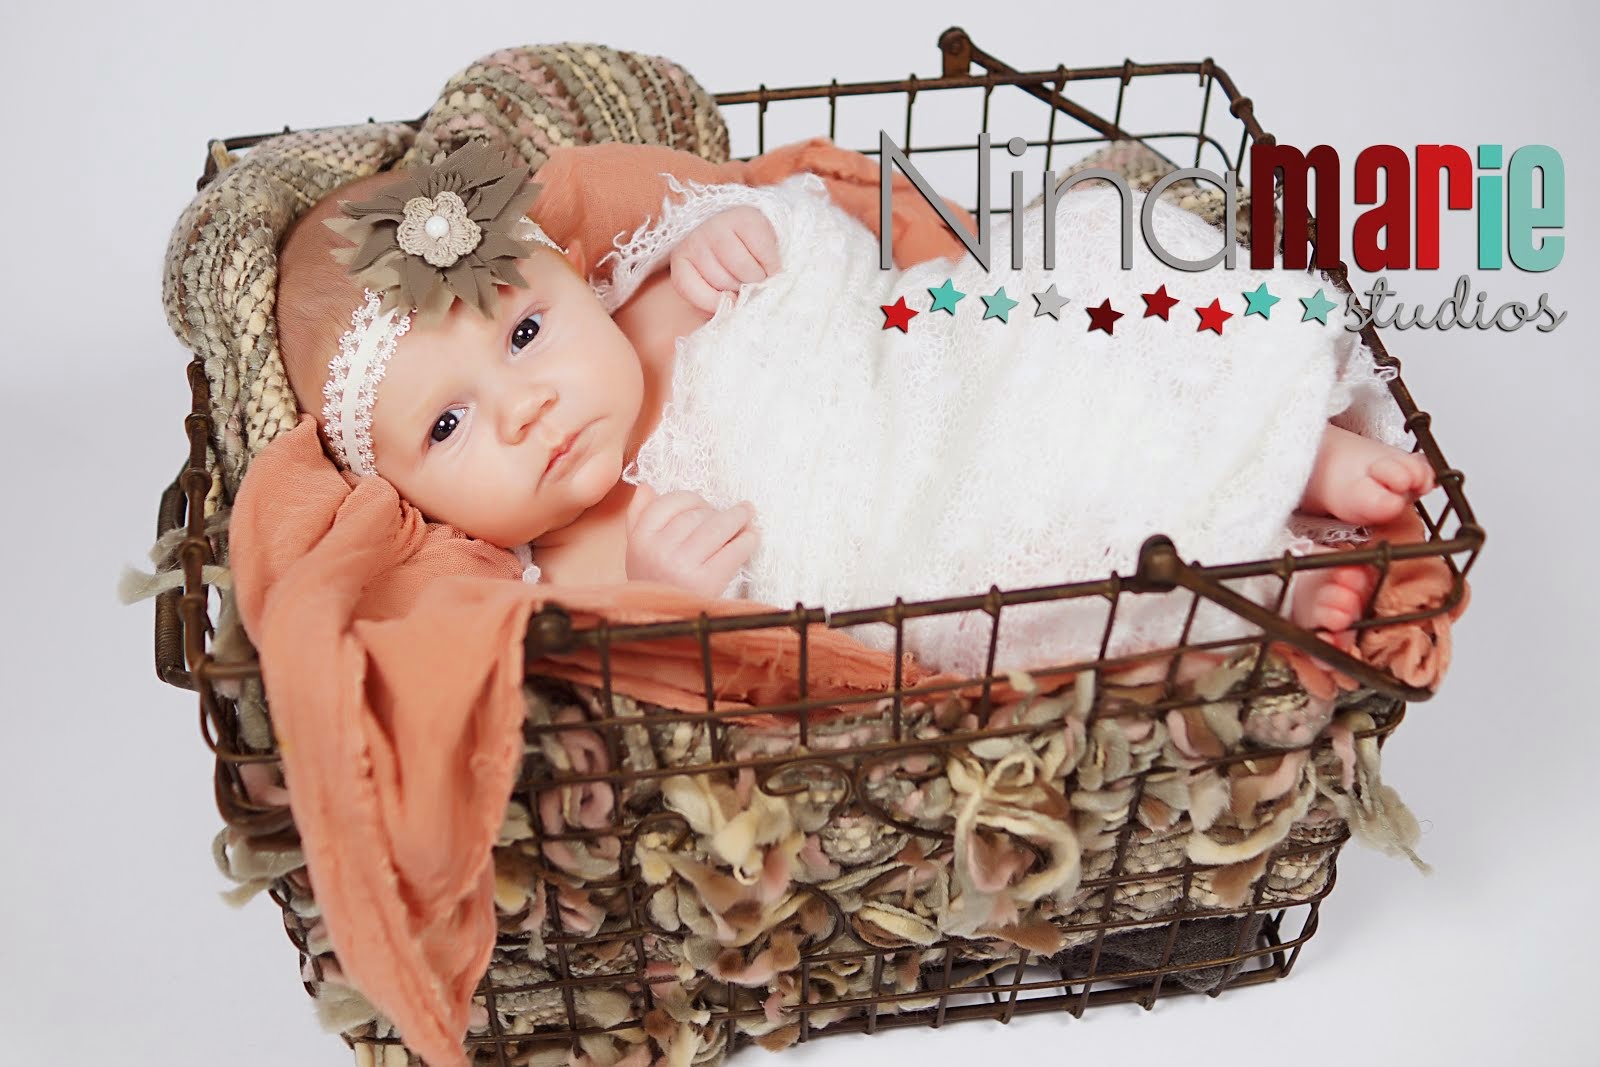 Check Out Our Bebe Collections!